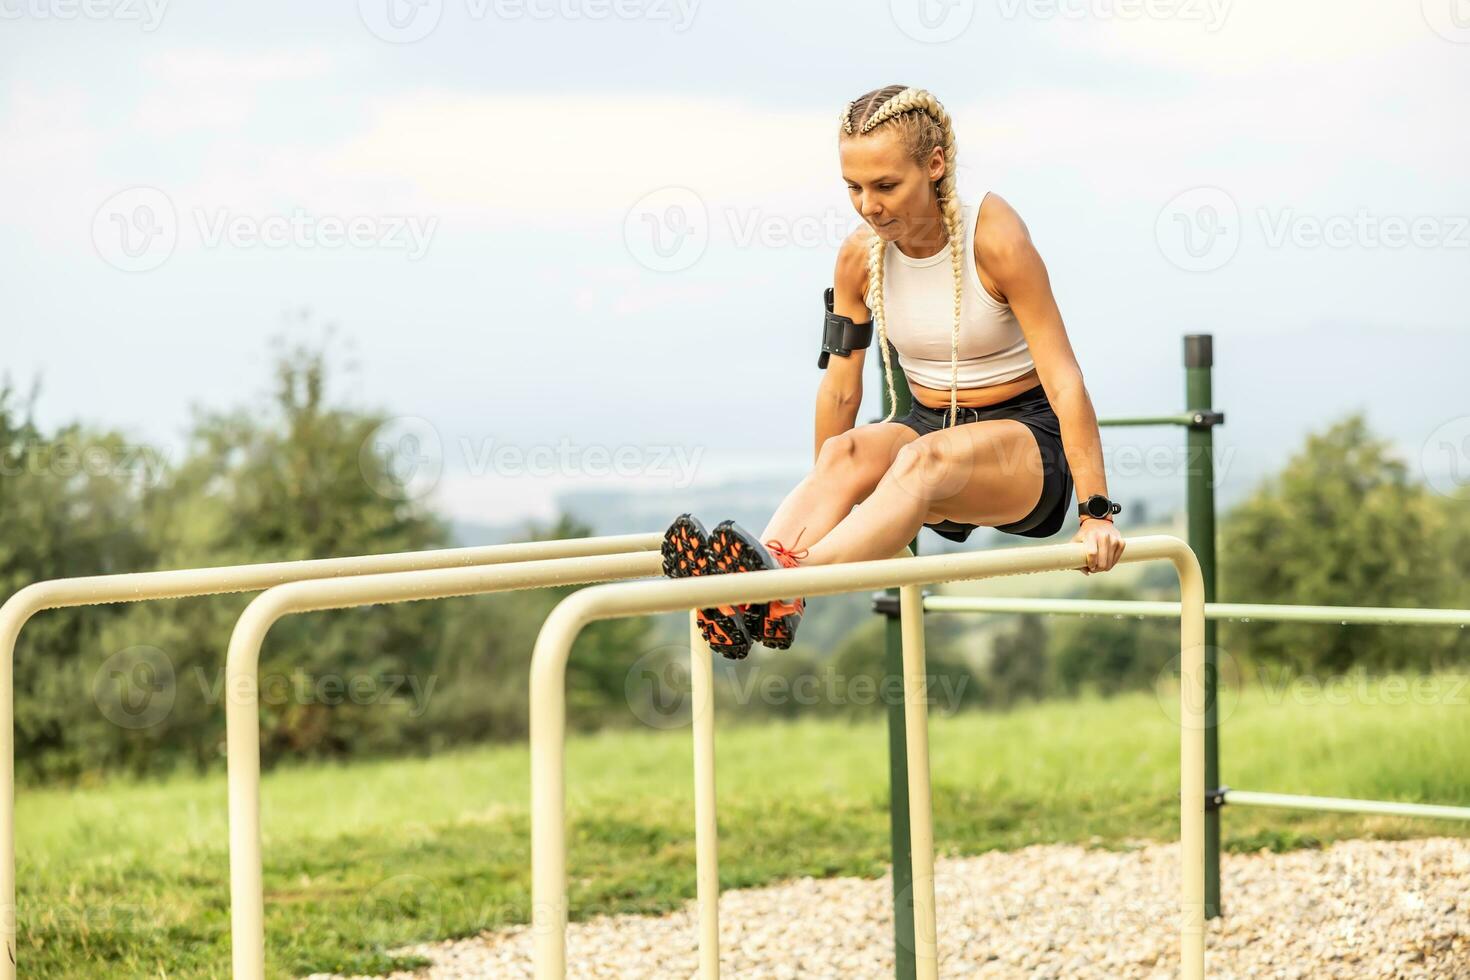 Sporty young female working out calisthenics in an outdoor gym using parallel bars. Beautiful blonde girl with braids works out outdoors doing push-ups on an elevated bar photo